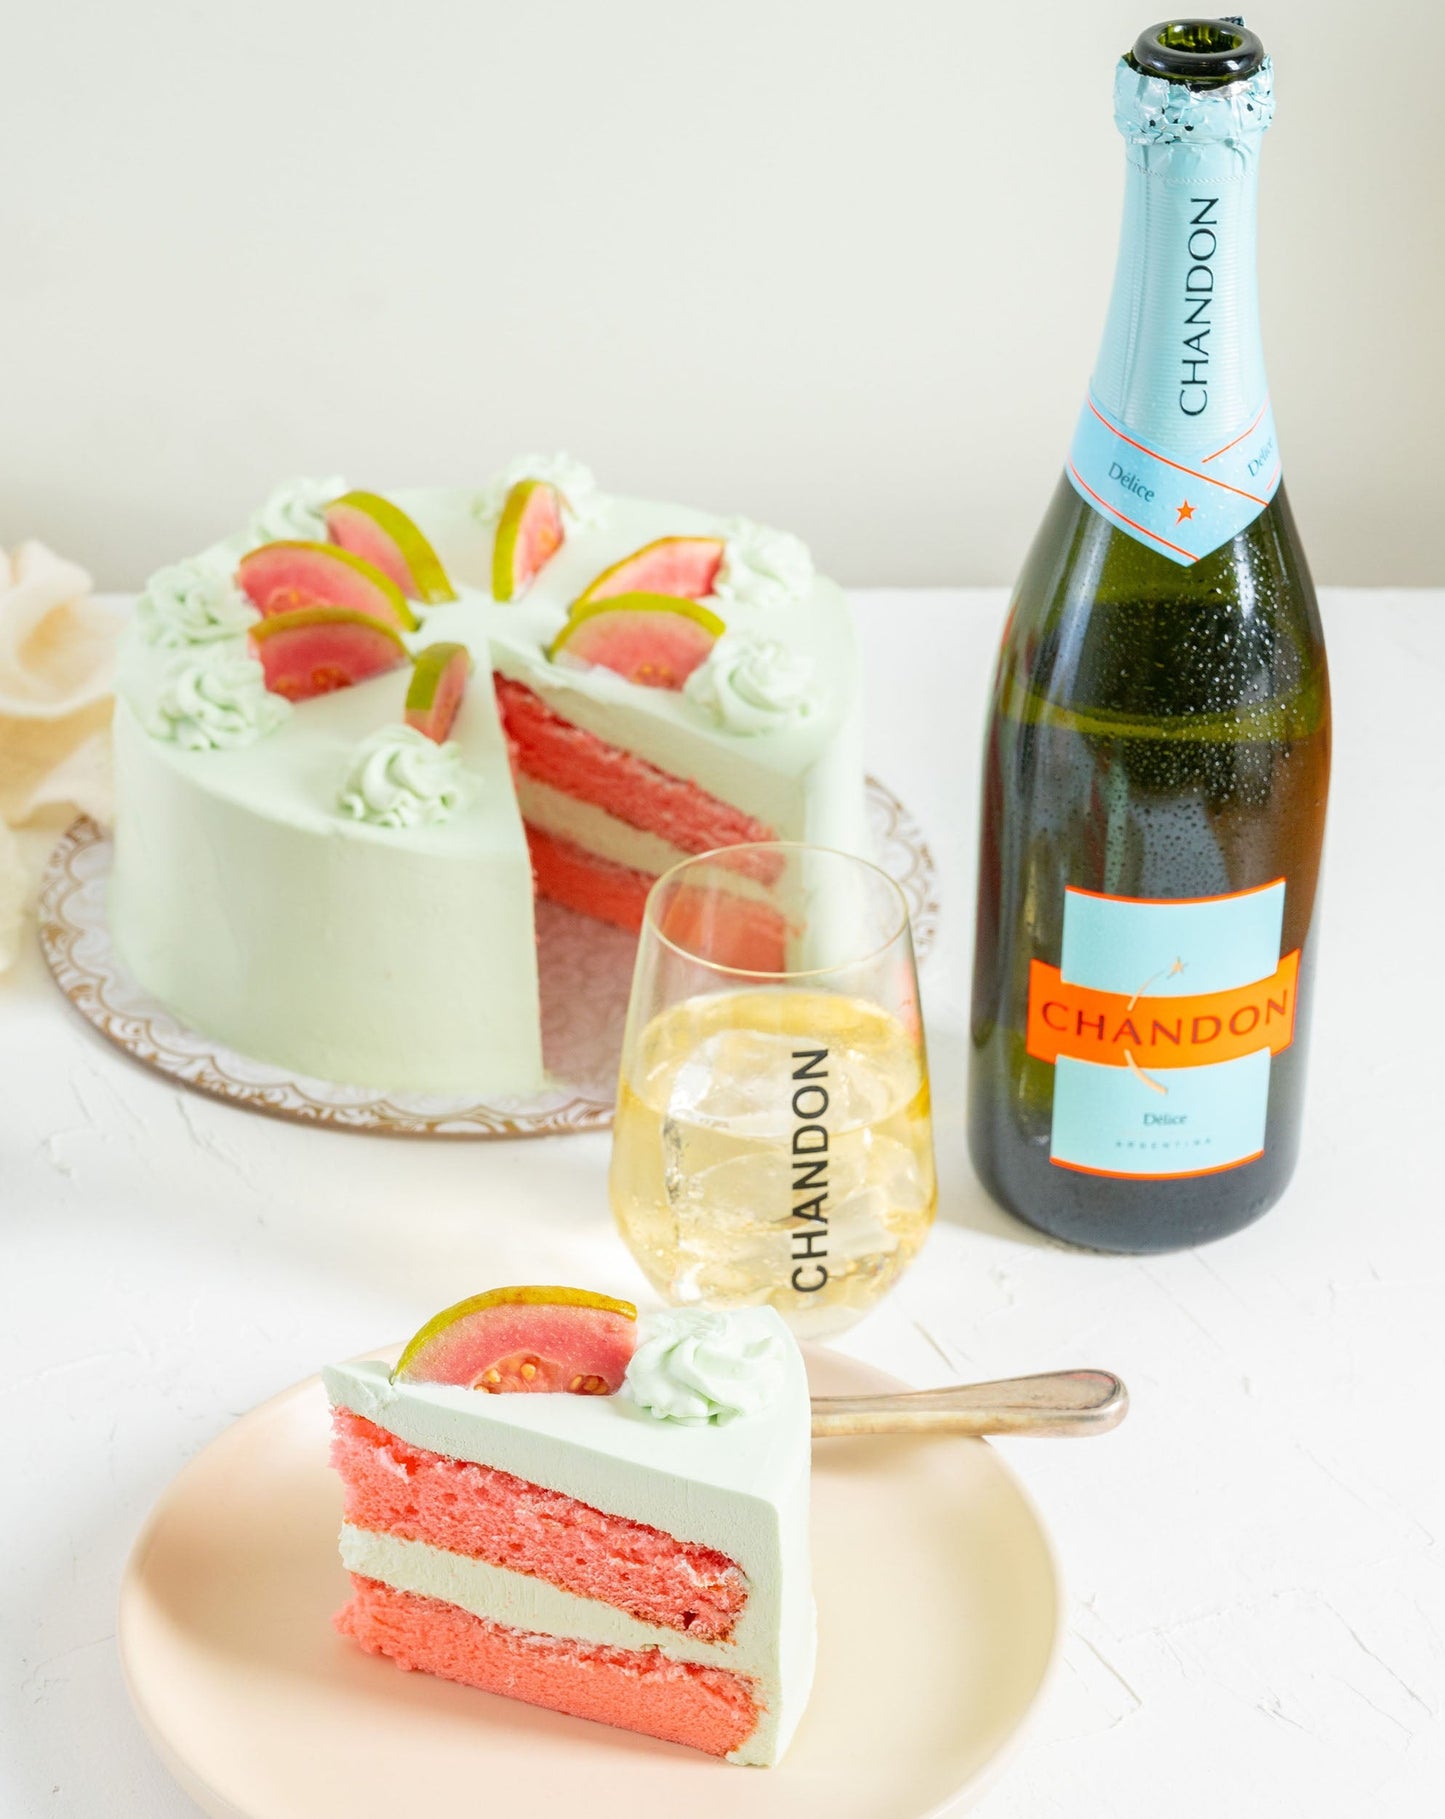 Guava cake and 1 bottle of Chandon Delice